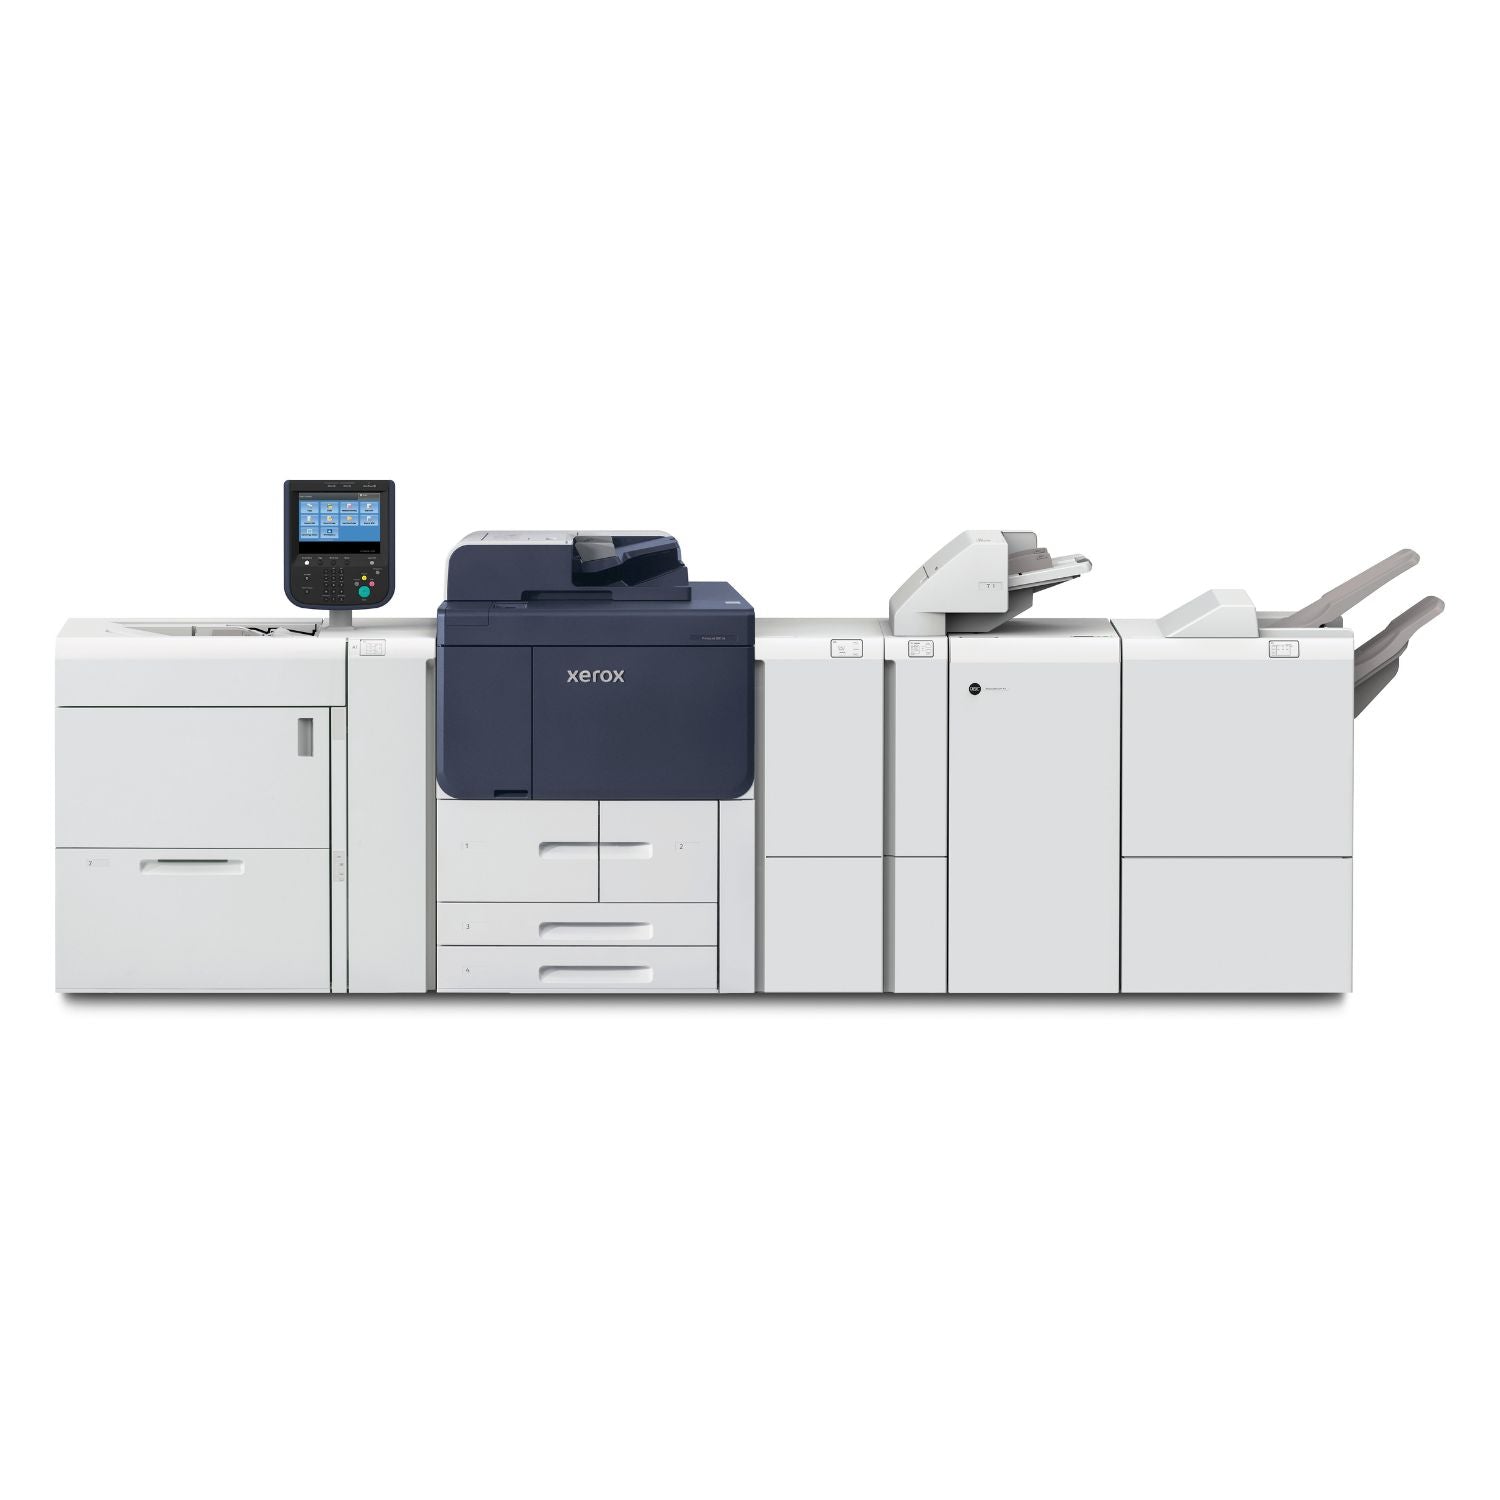 Xerox PrimeLink B9125 Office-Friendly Monochrome Multifunction Laser Printer, 125PPM With Support For 13 x 26 In. (330 x 660mm) Banner Printing